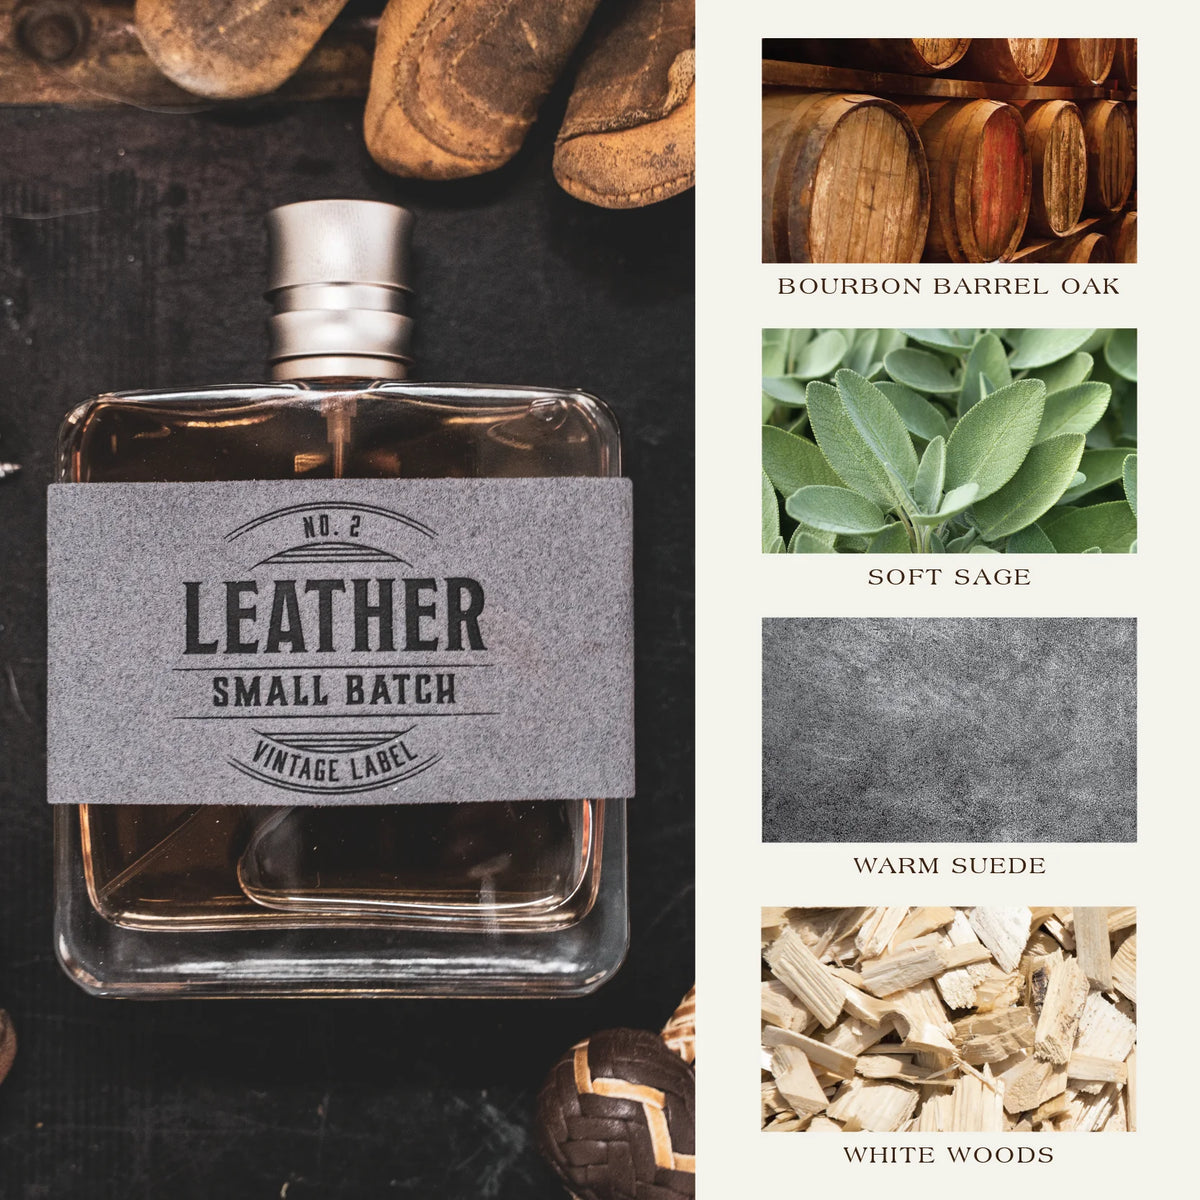 Leather No. 2 Small Batch Vintage Label Cologne